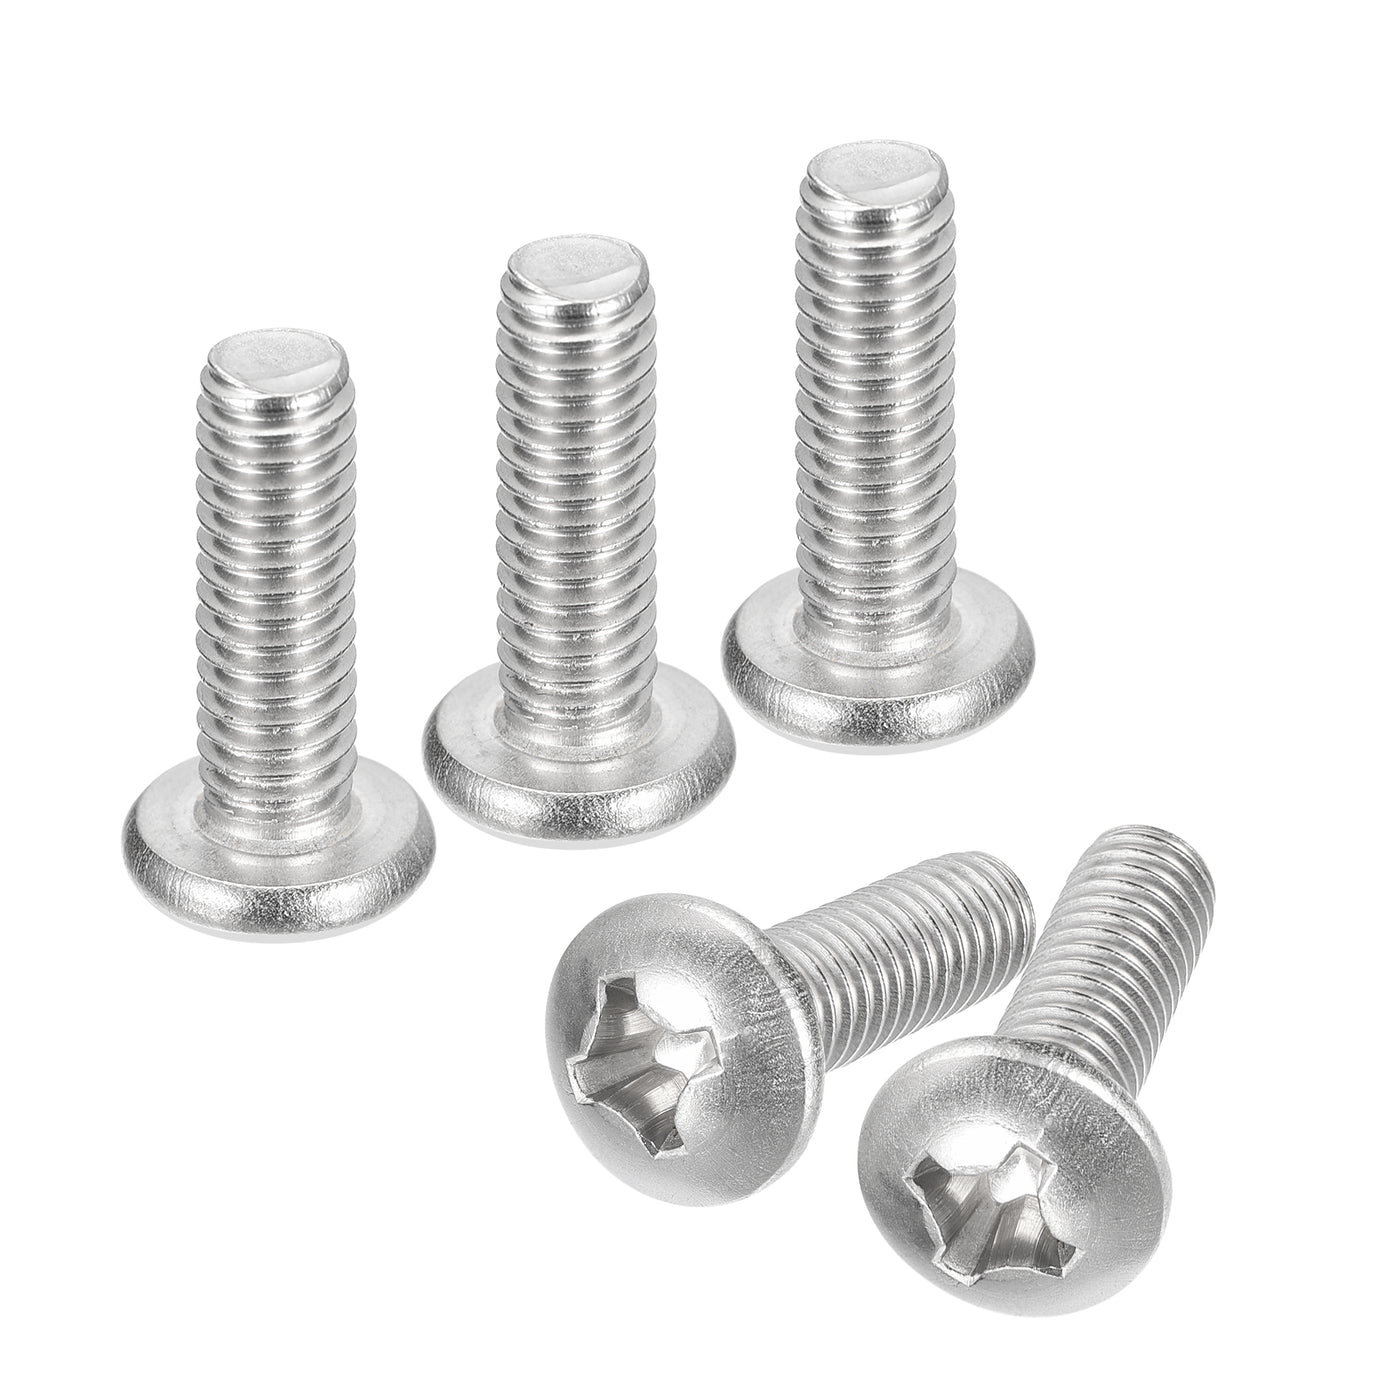 uxcell Uxcell 5/16-18x1" Pan Head Machine Screws, Stainless Steel 18-8 Screw, Pack of 10